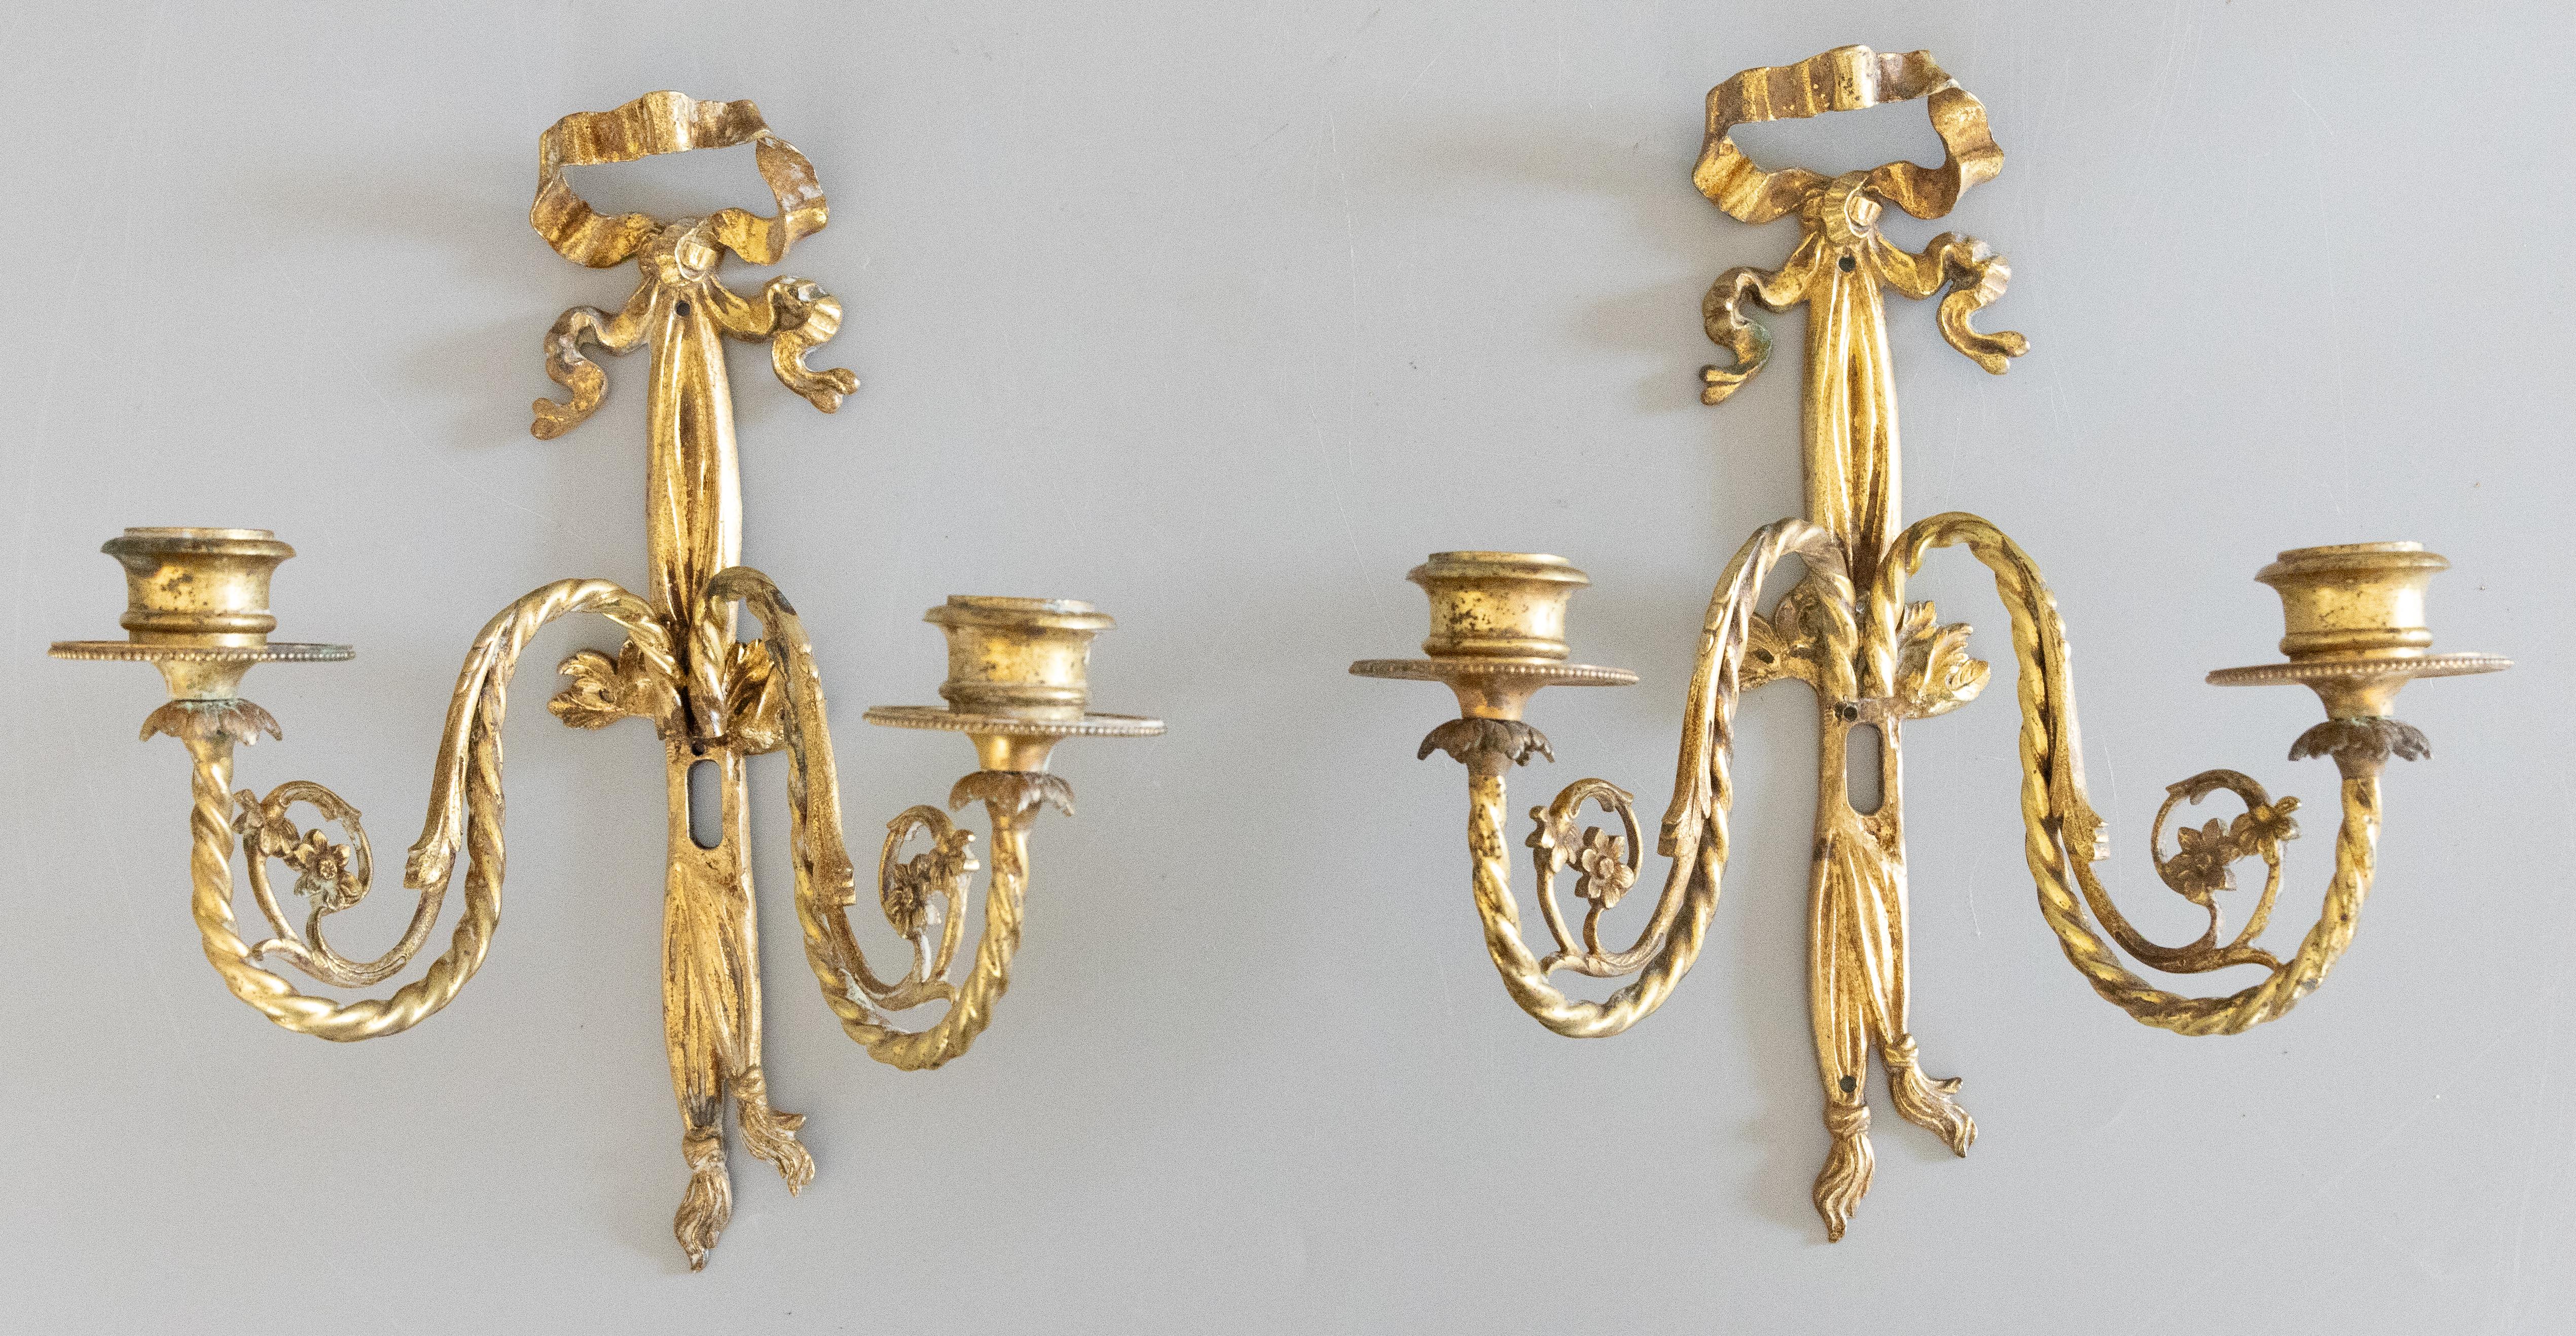 Pair of Antique French Louis XVI Style Gilded Bronze Bow & Ribbon Candle Sconces For Sale 3